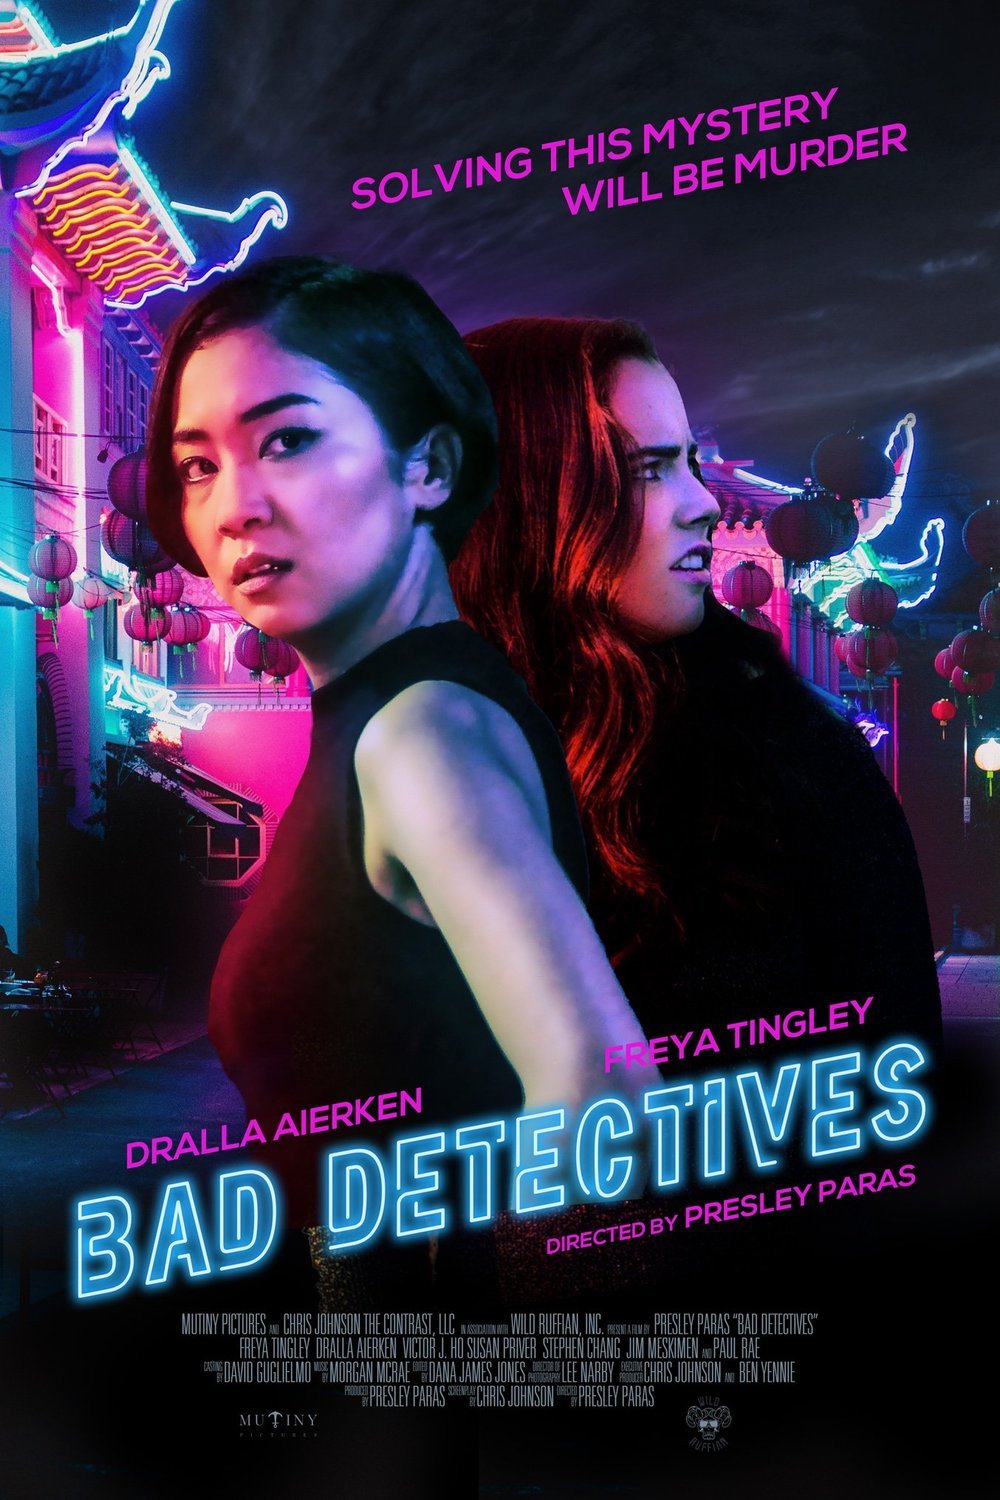 Poster of the movie Bad Detectives